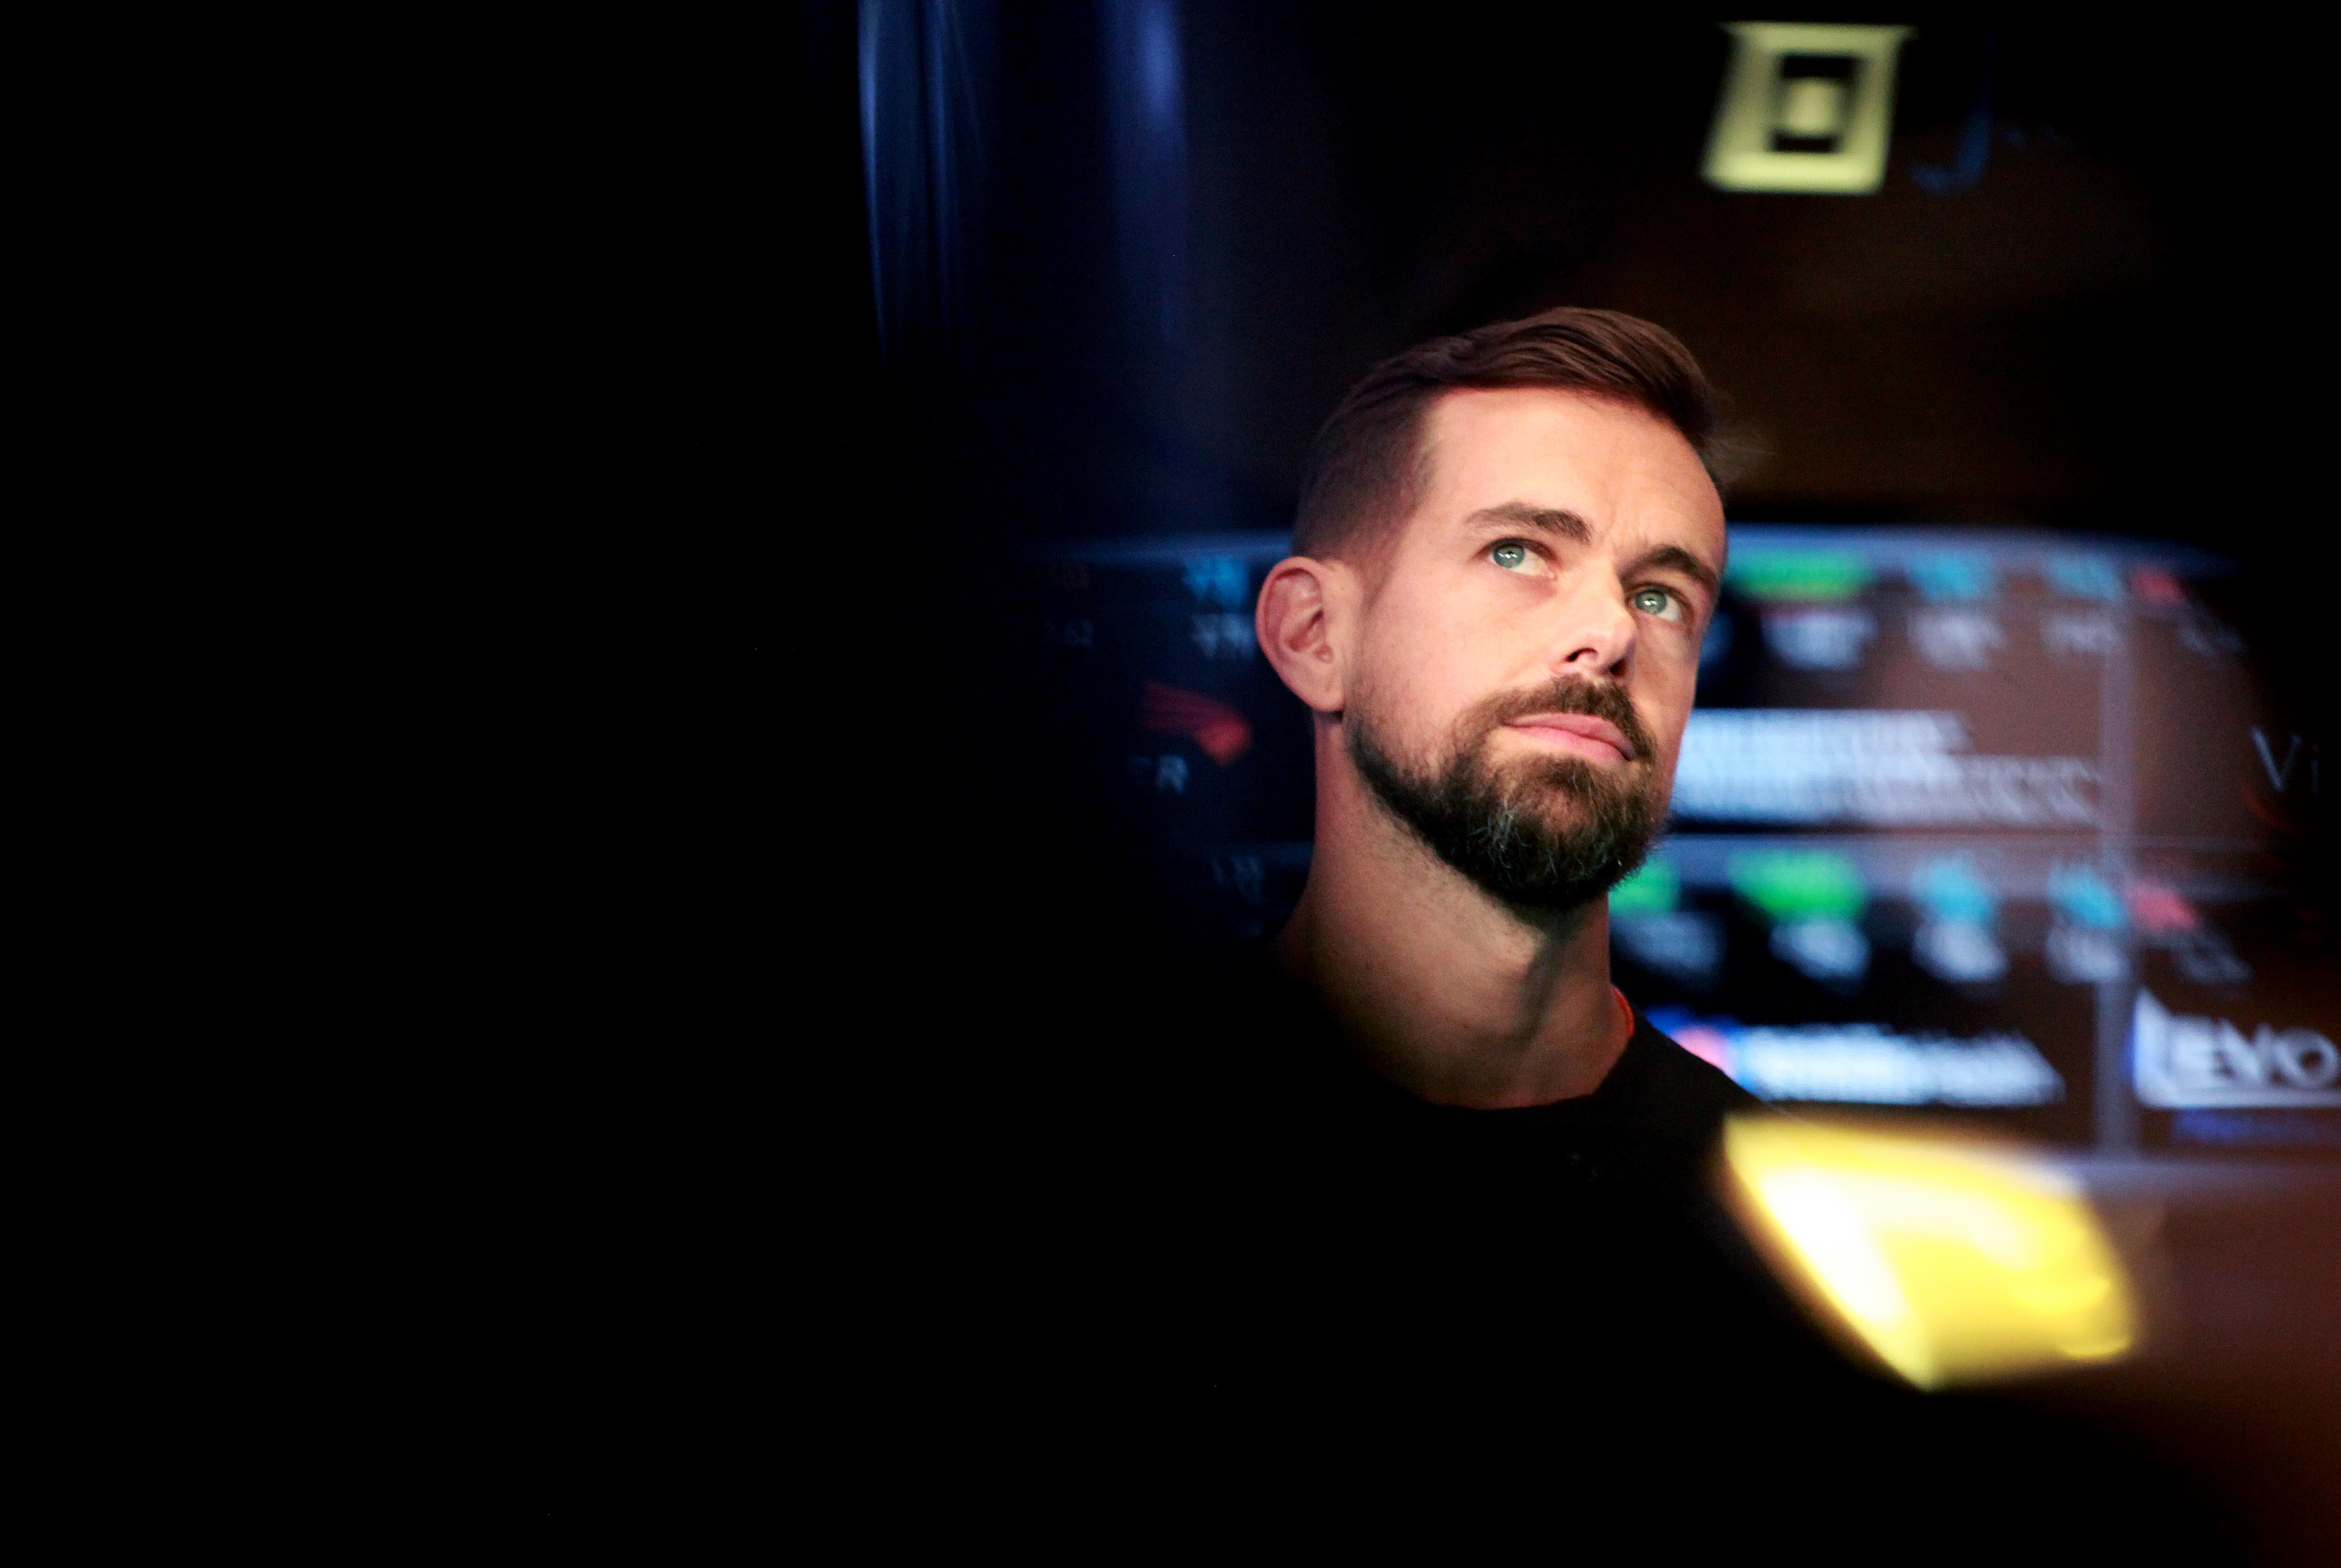 Square Inc. Begins Trading On The NYSE Following IPO